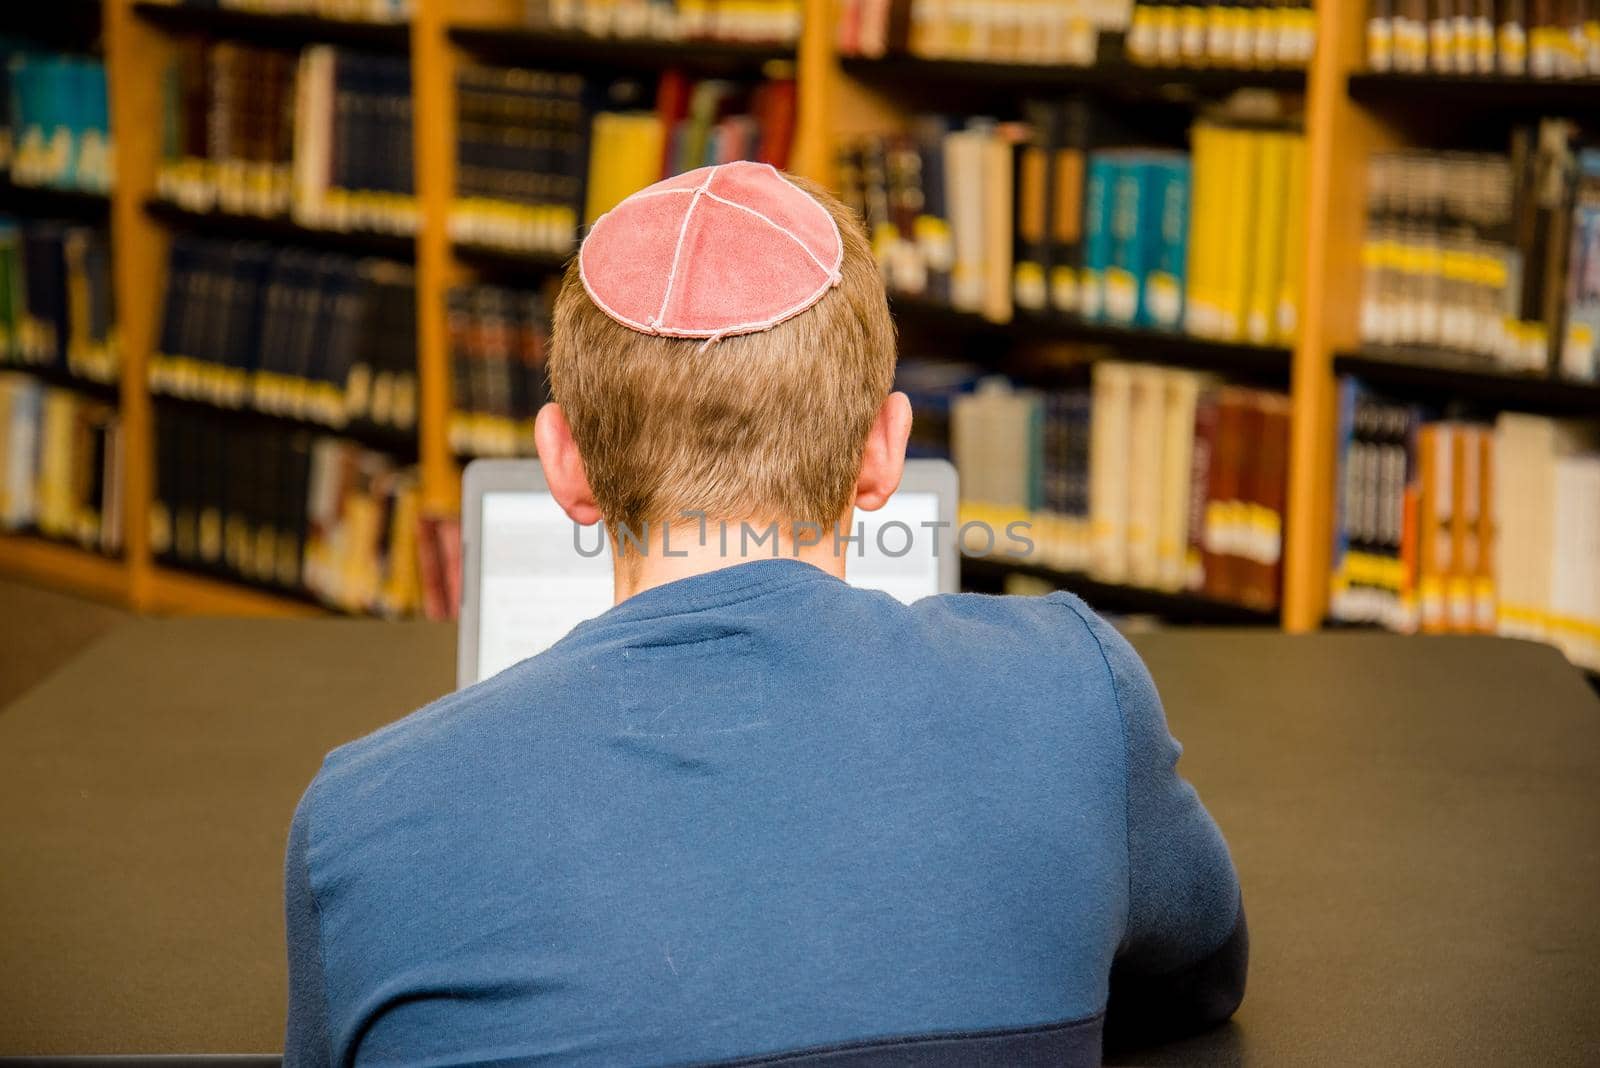 Young boy wearing a yarmulke from the back doing work on a laptop in a library with colorful books on shelves. by jyurinko